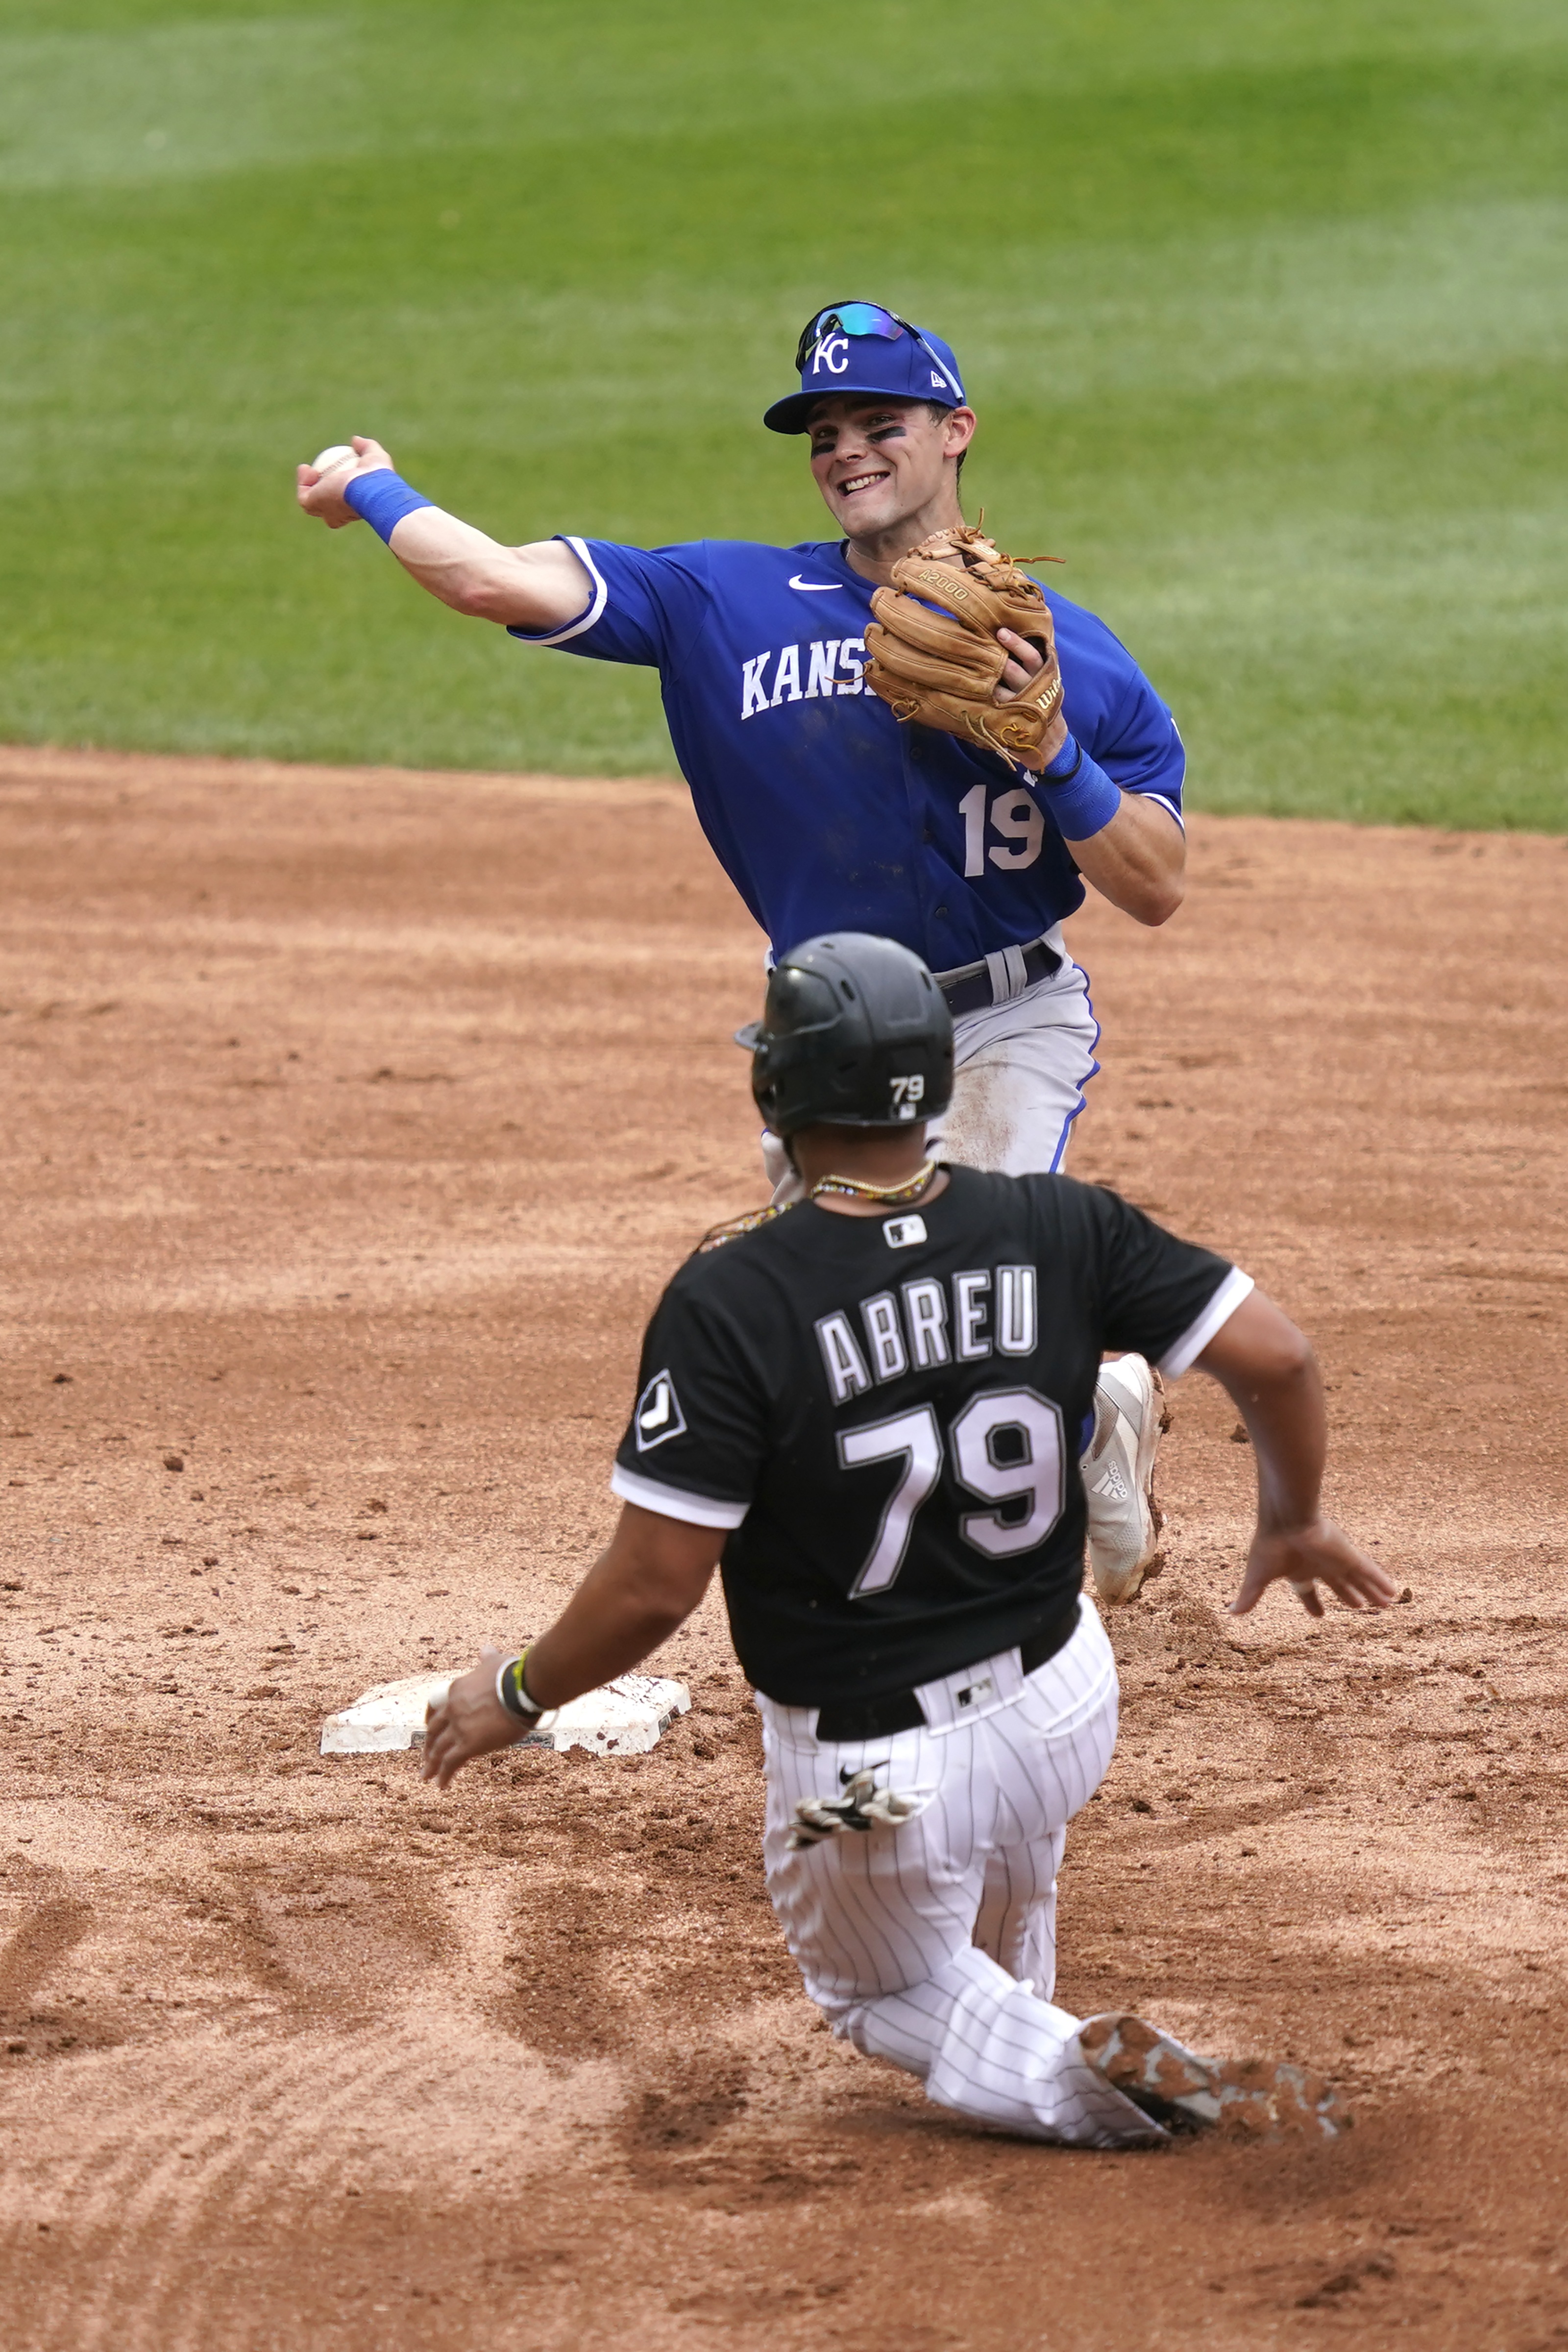 White Sox starting pitcher Lance Lynn delivers against the Royals